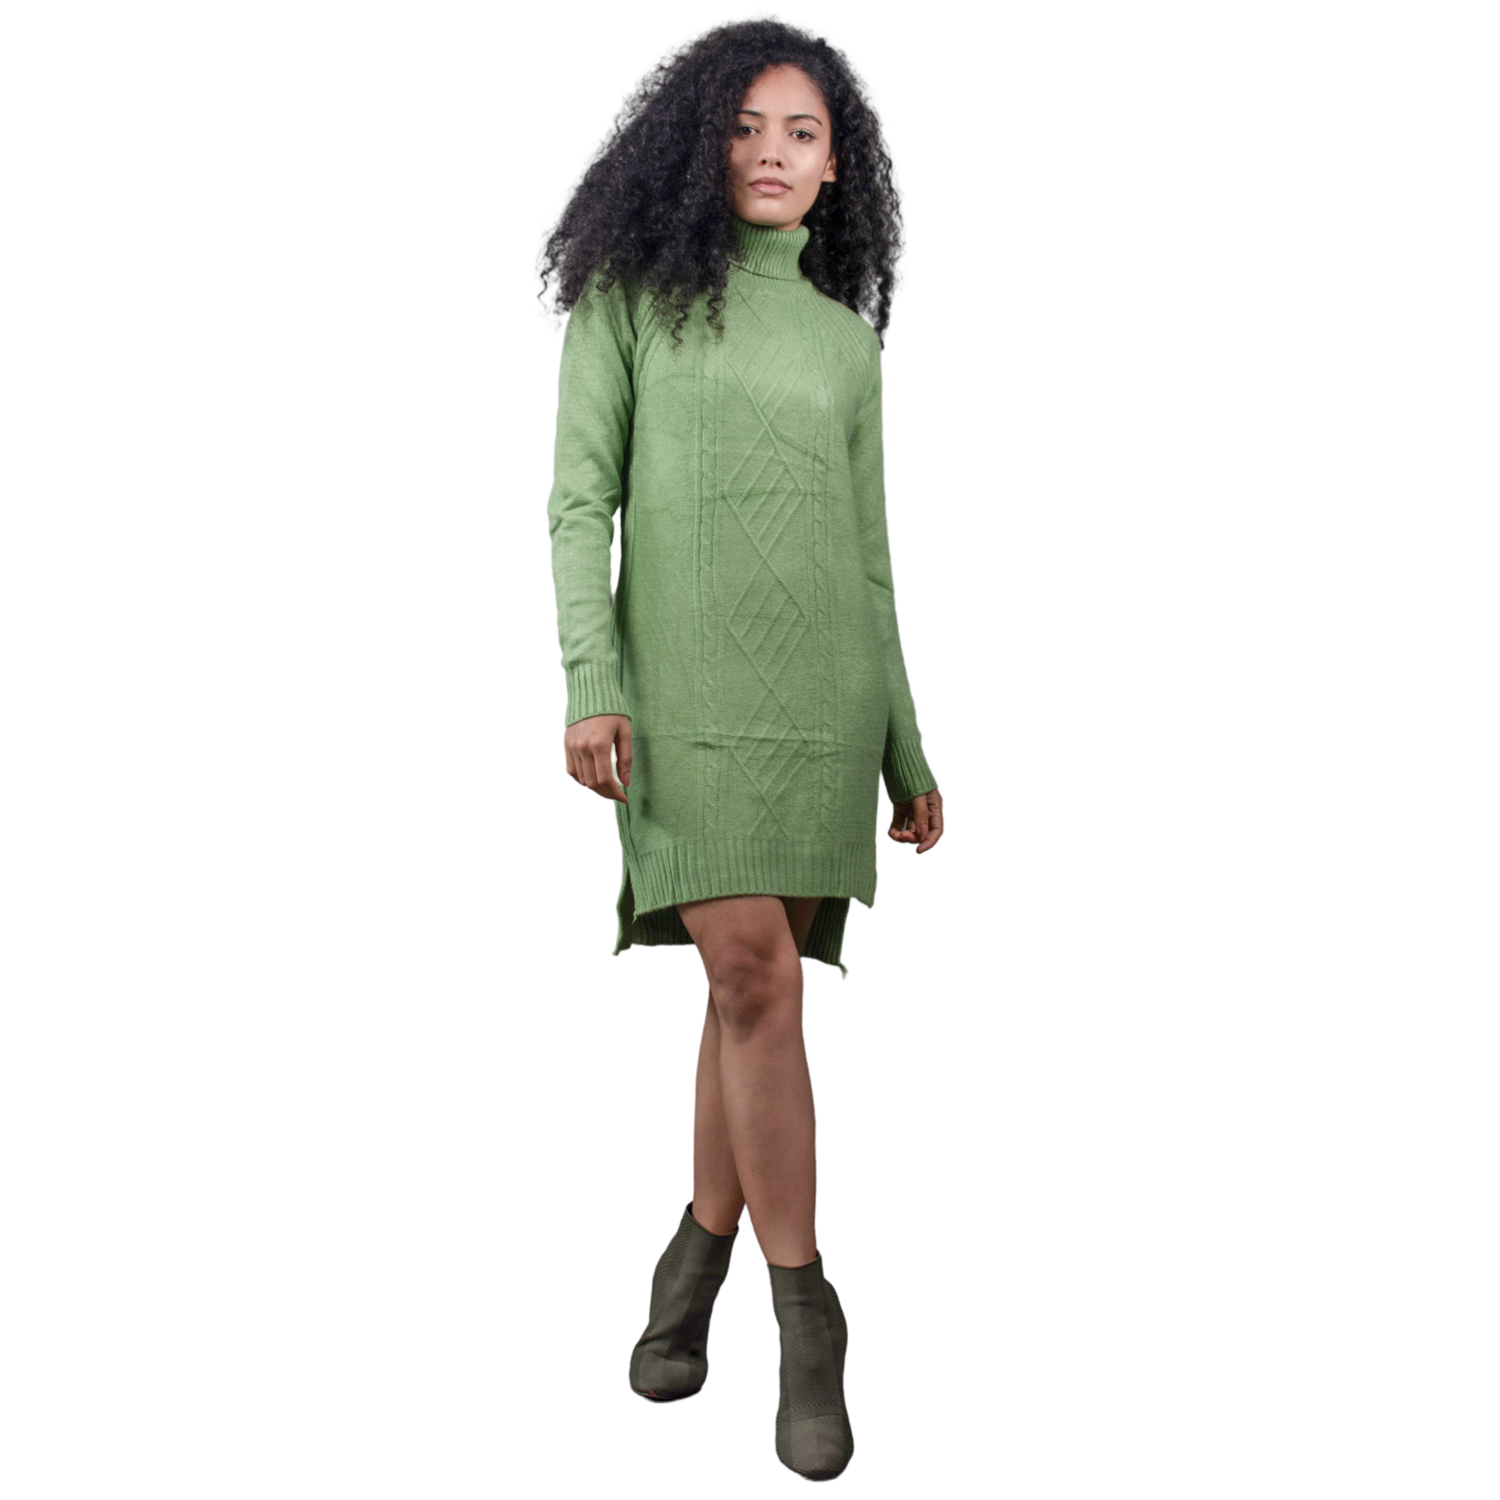 The Best Amazon Member-Only Sweater Dress Deals Under $50